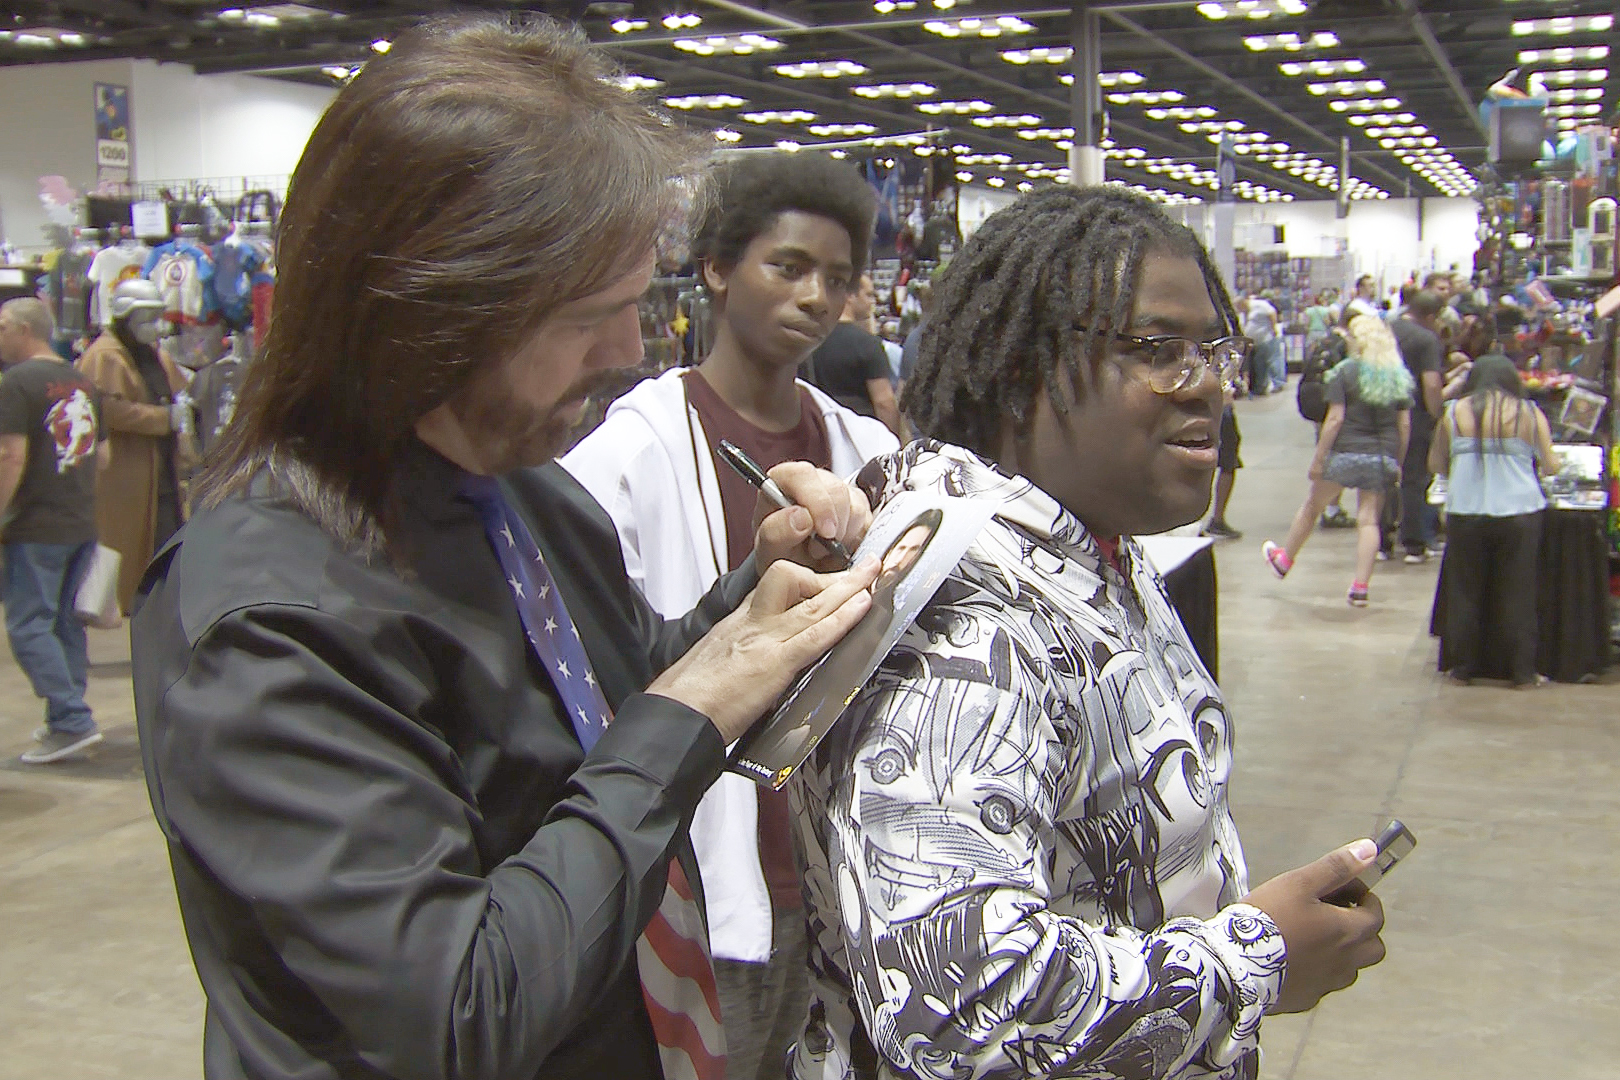 Famous video game player Billy Mitchell signs an autograph at the 2019 Indiana Comic Convention.